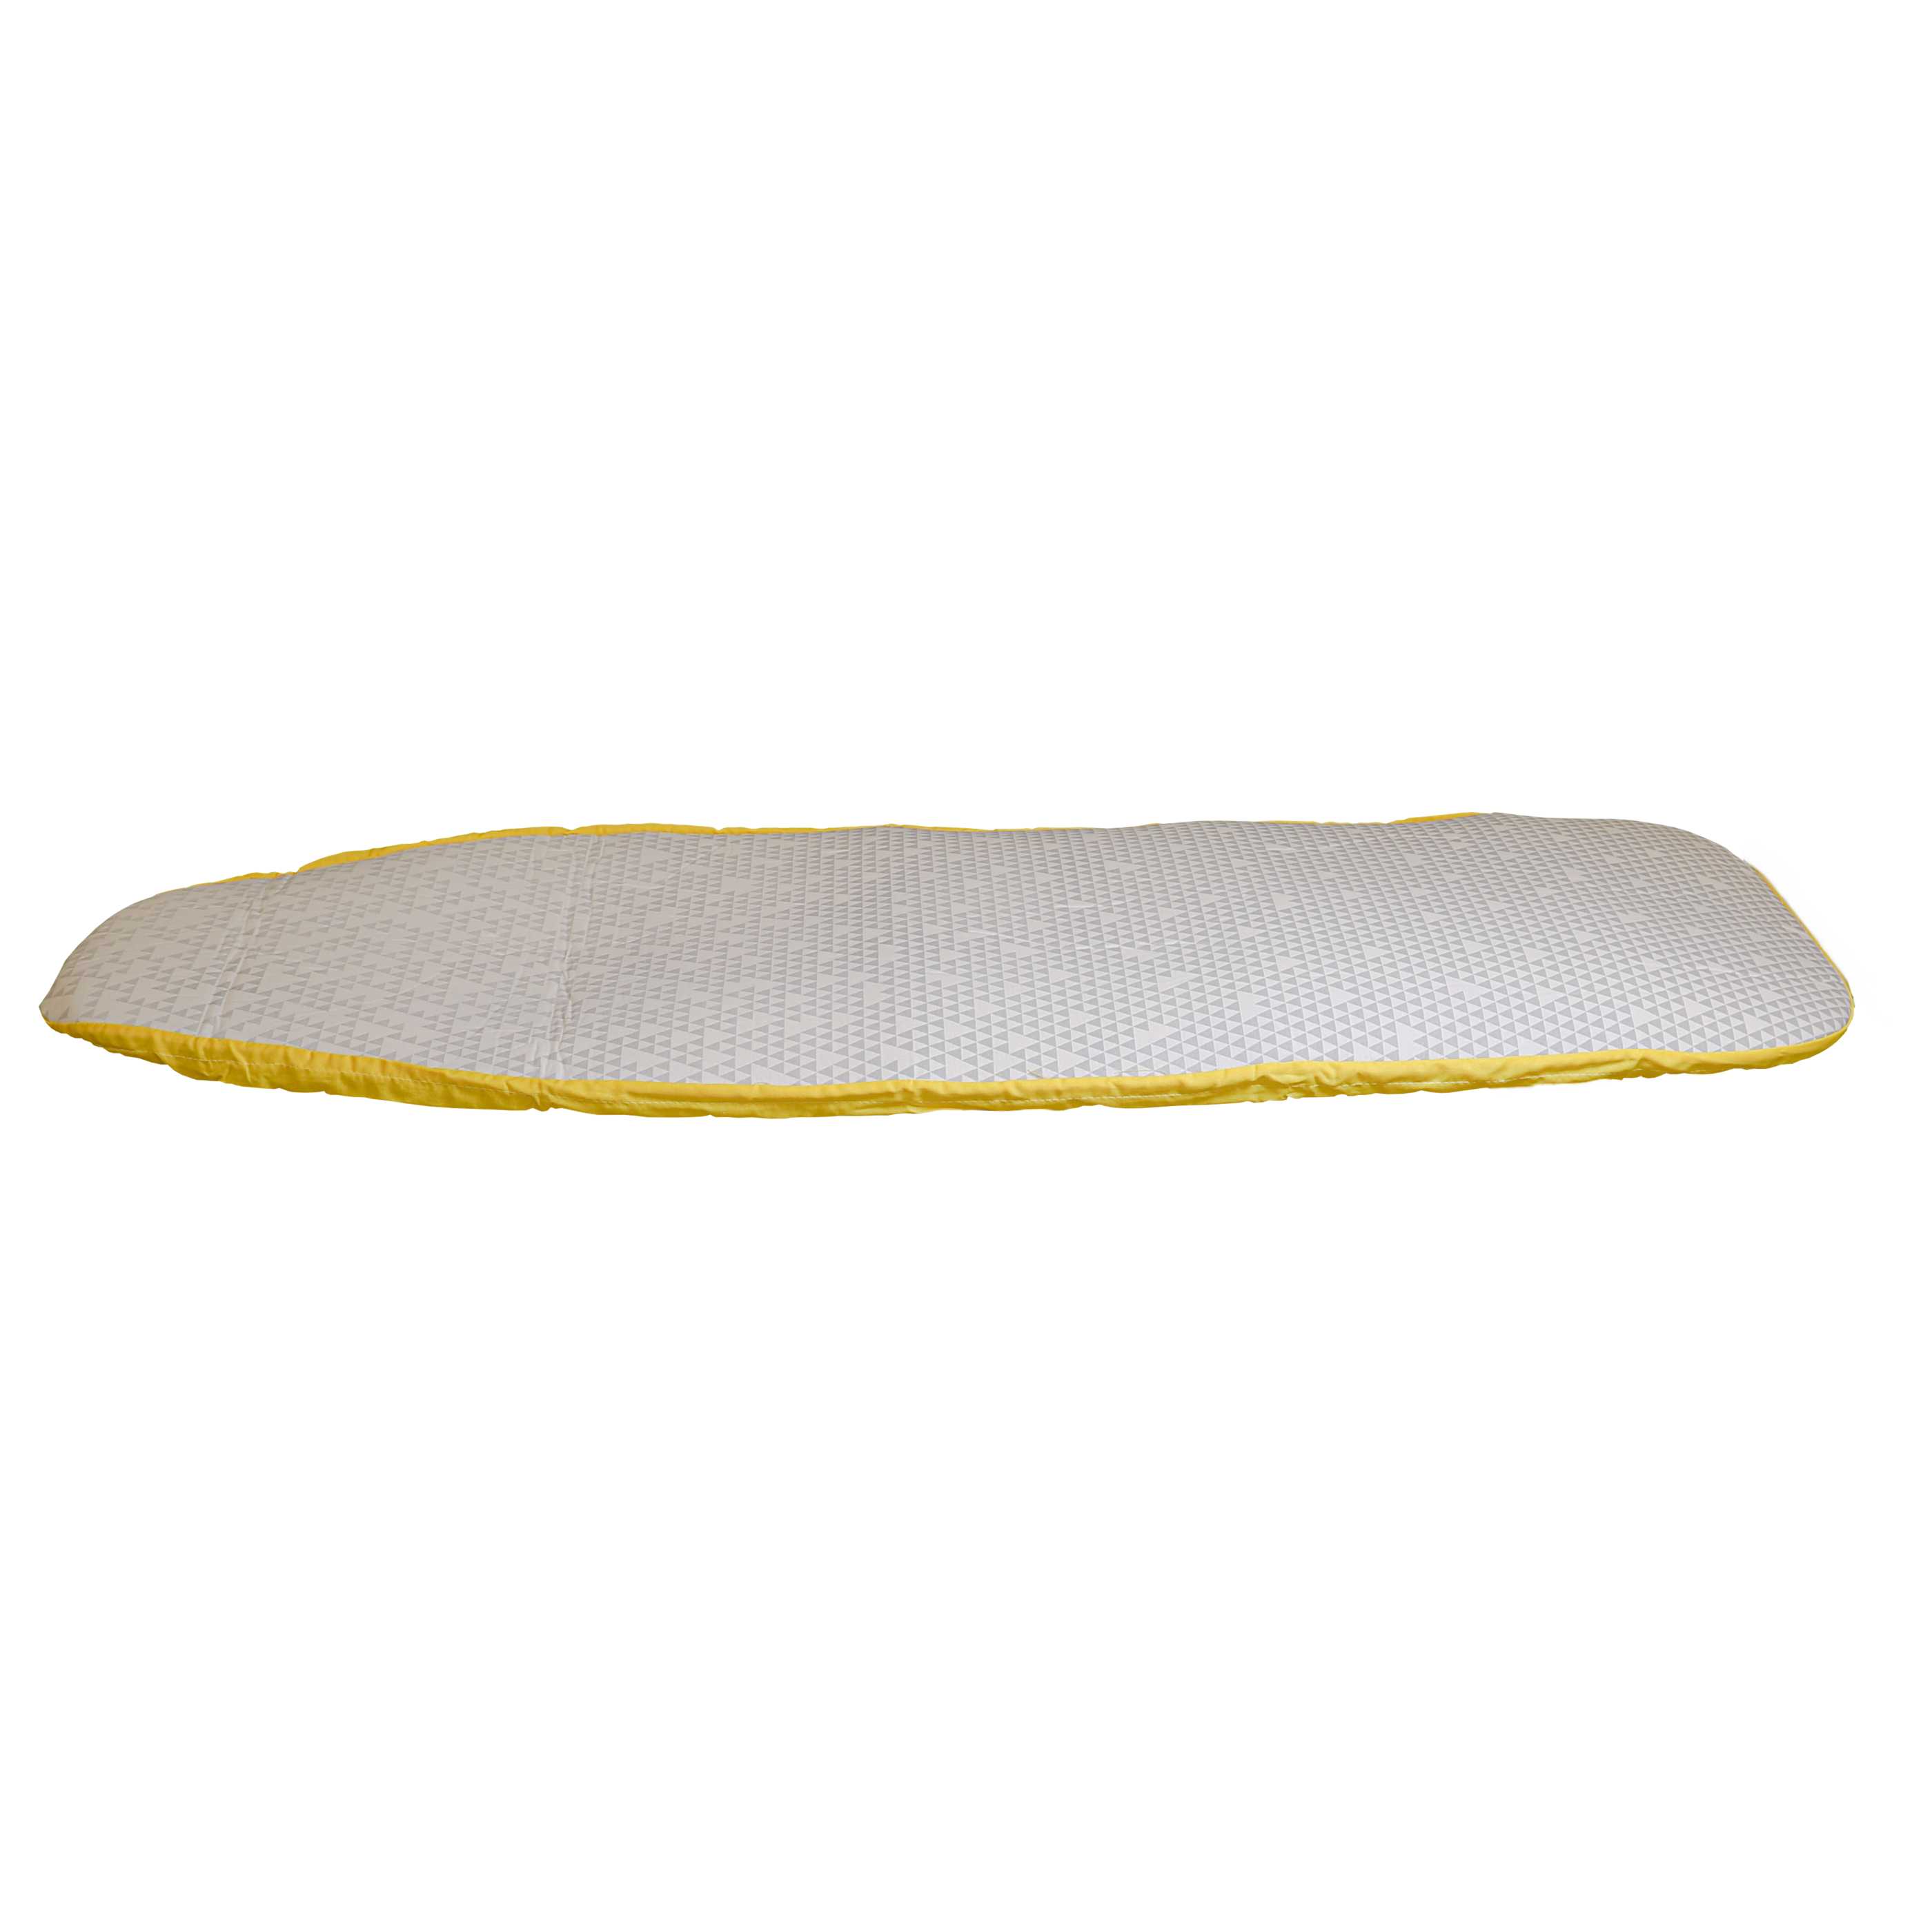 Ironing Board Cover as Exchange for Kärcher 2.884-969.0 suitable for Kärcher Active Ironing Board